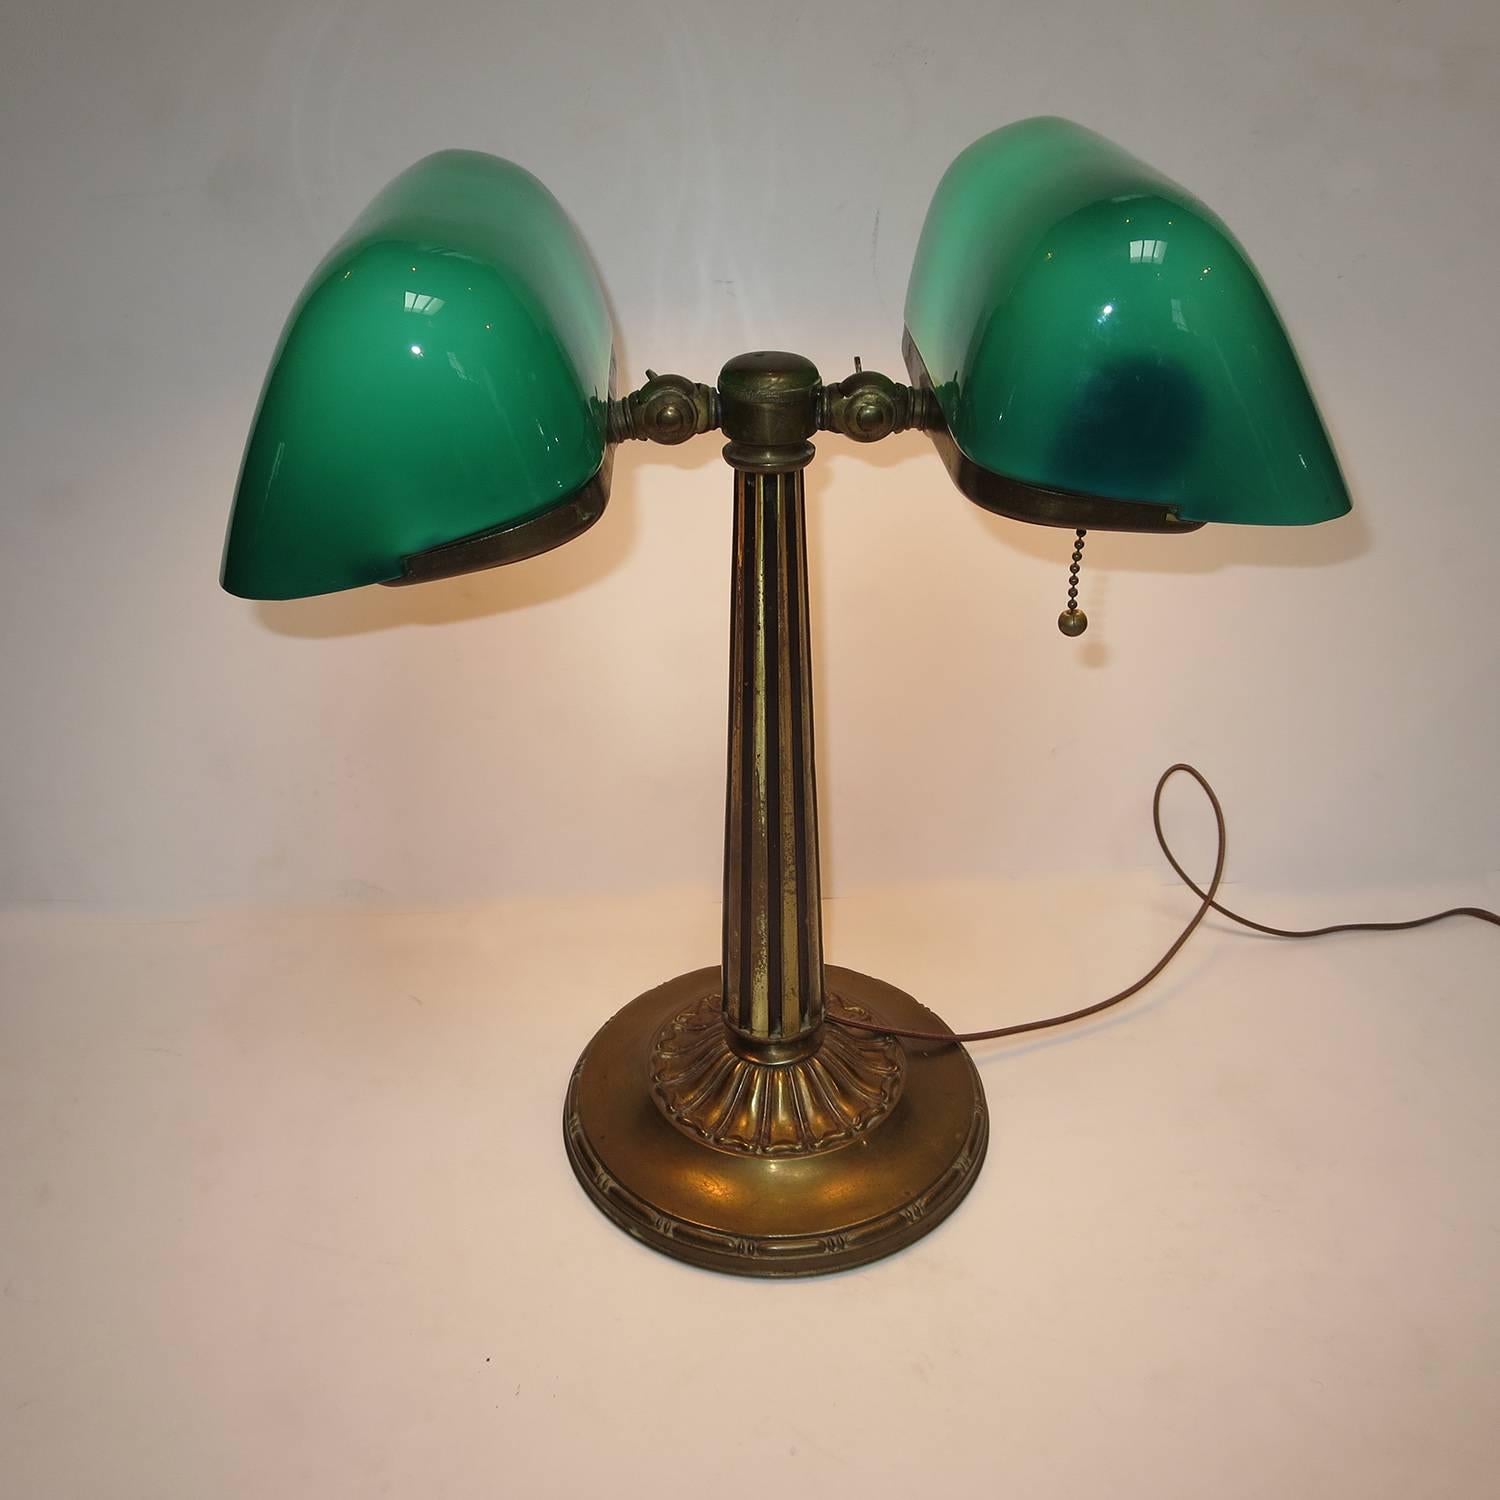 First produced in 1909, the Emeralite desk lamp was the creation of Harrison McFaddin of New York. They are often referred to as 